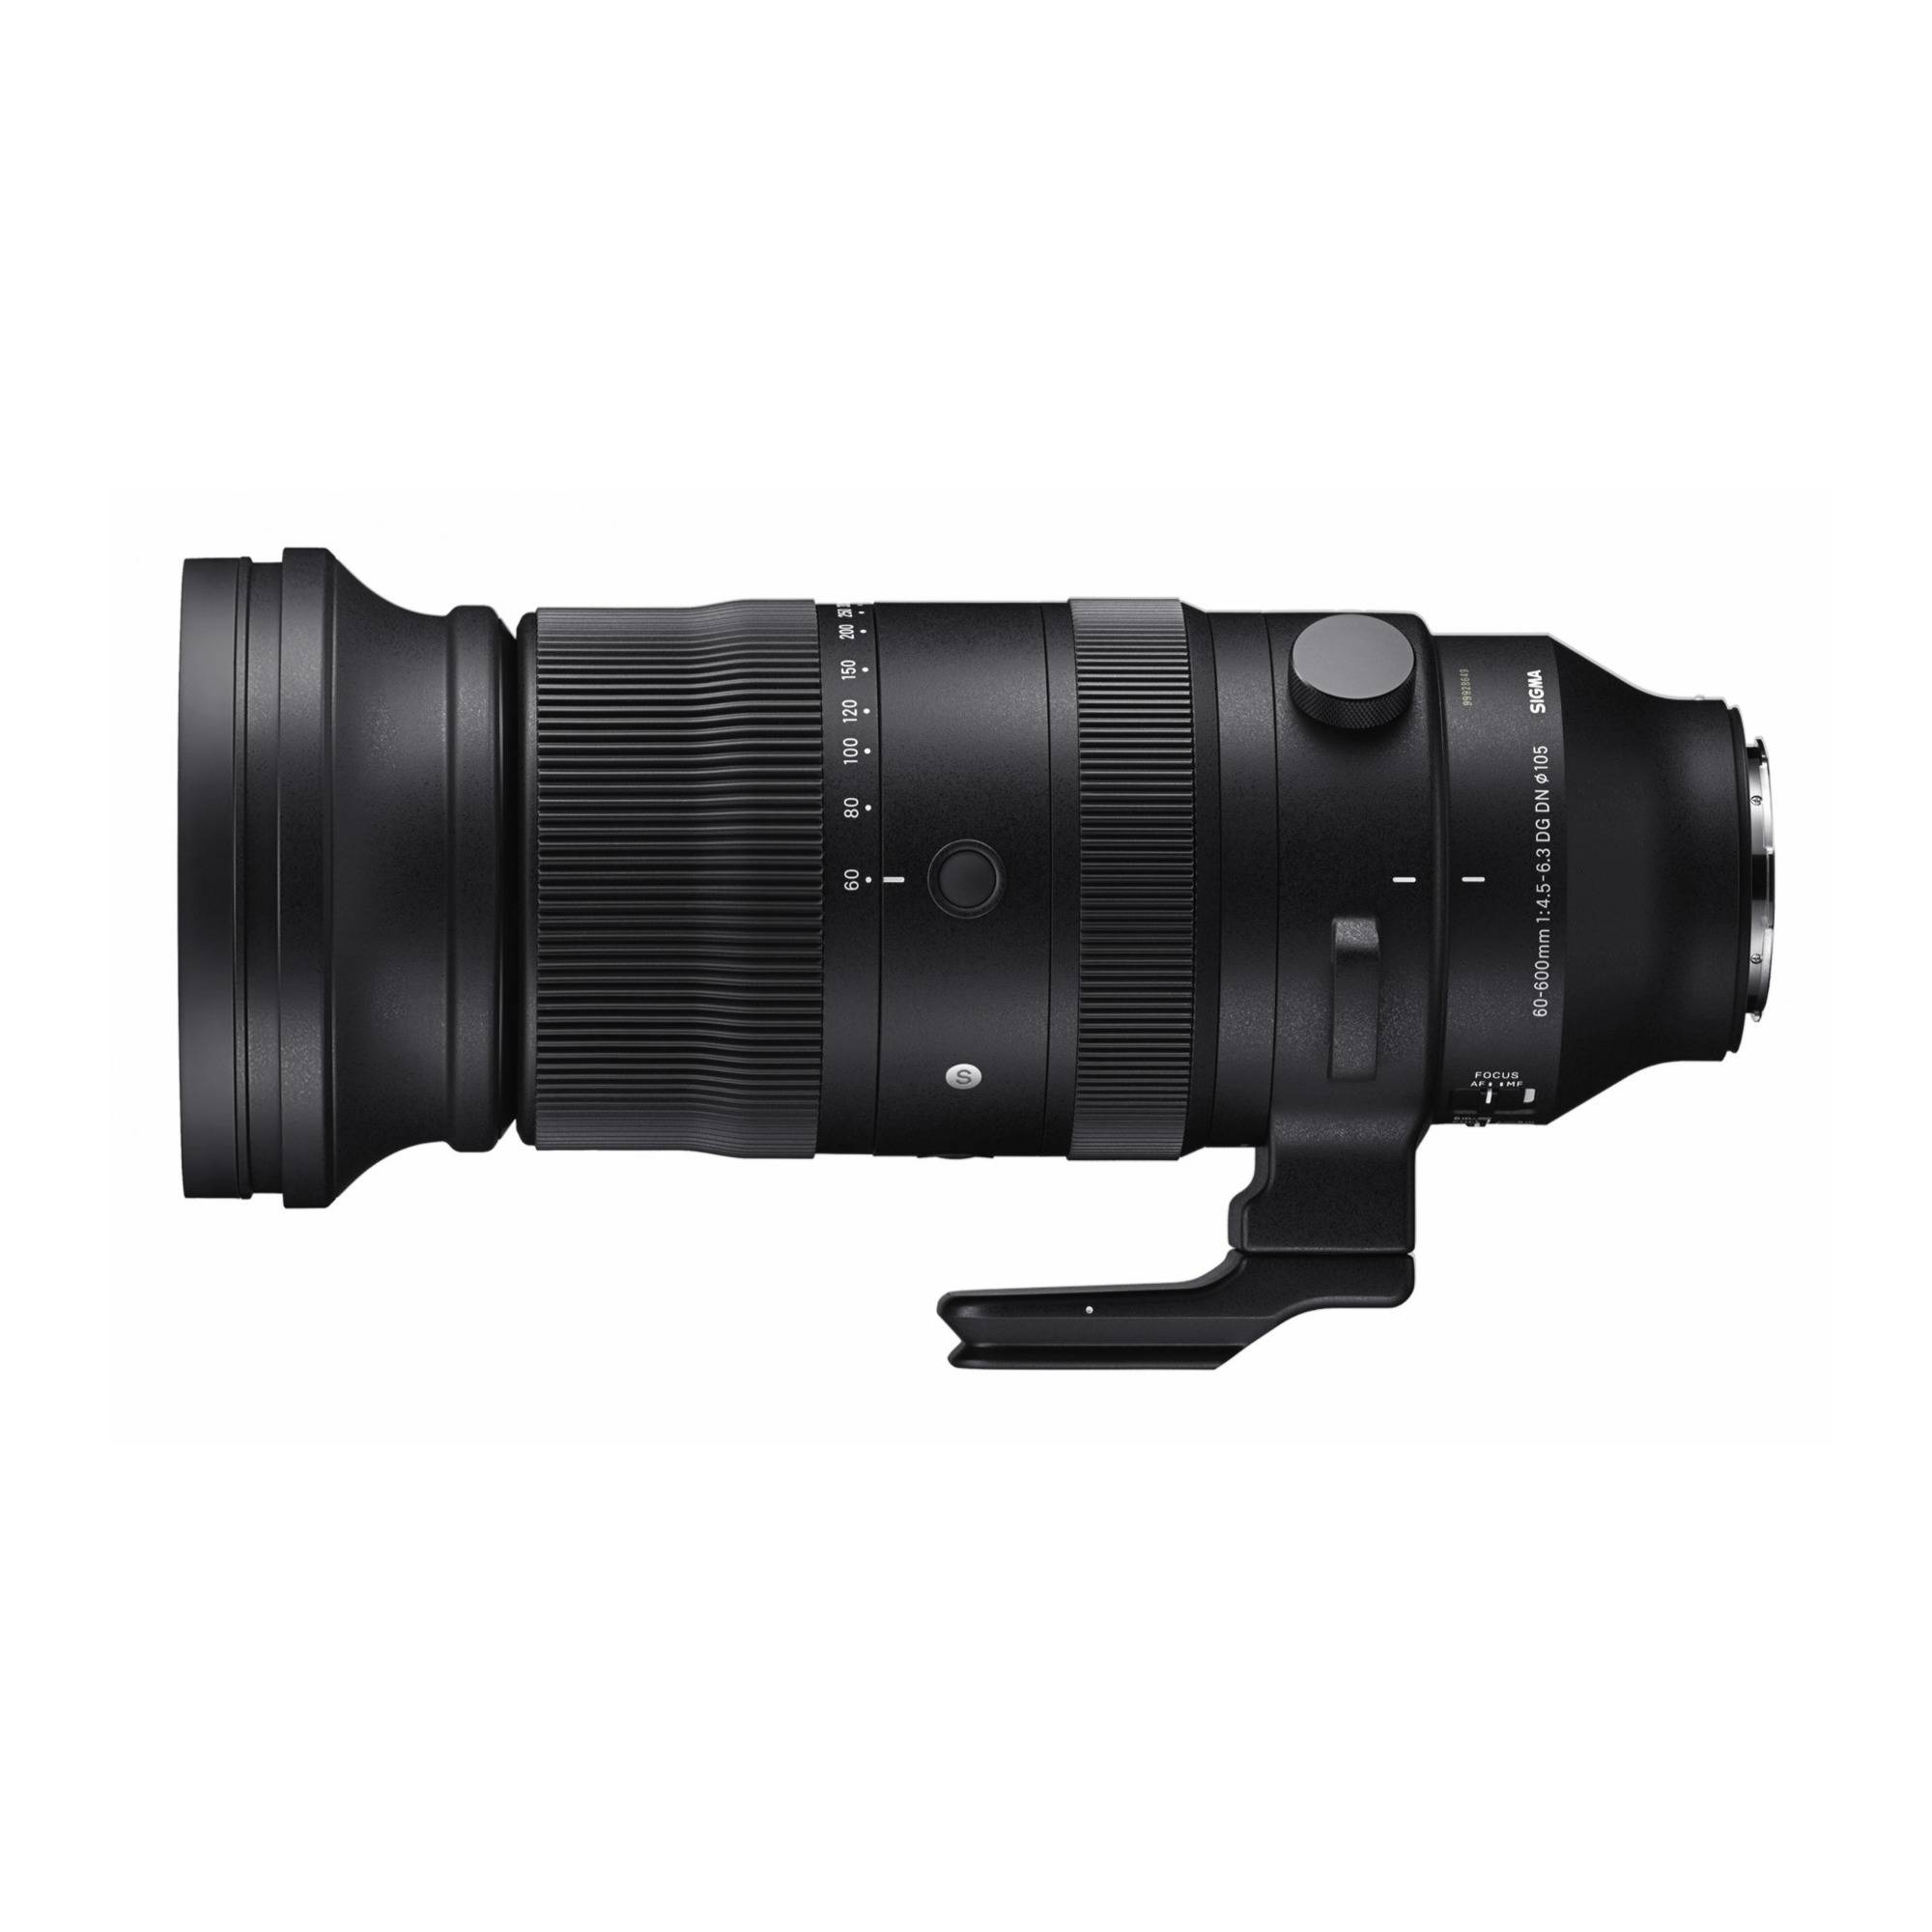 Sigma 60-600mm F4.5-6.3 DG DN OS Sports Lens for Leica L Mount with 10x Zoom